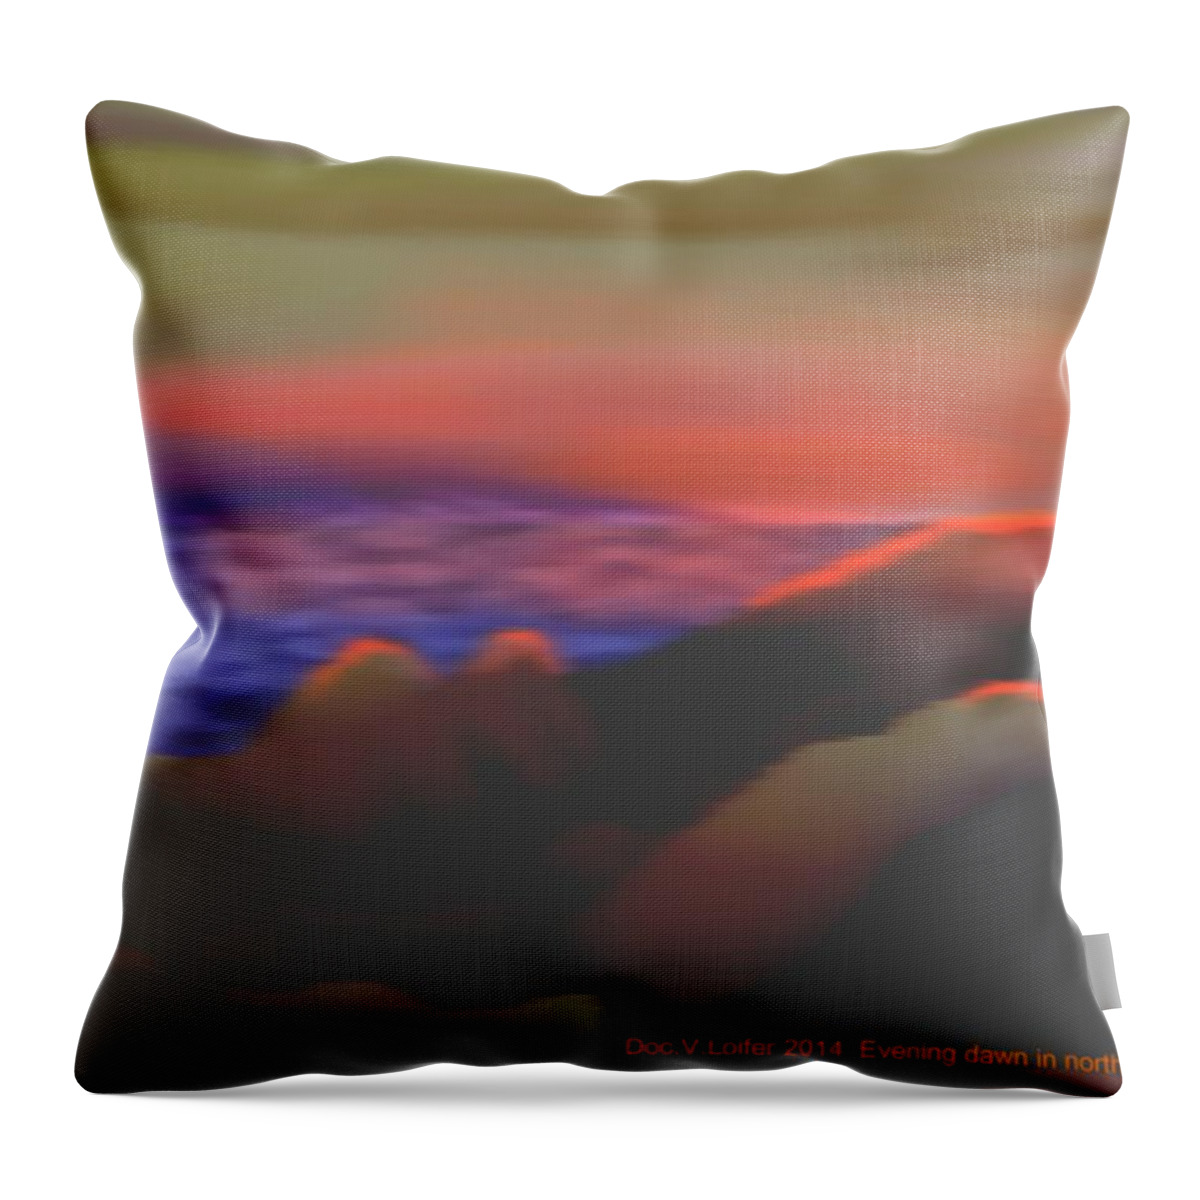 Sky Colors Sea Reflections Sunset Dawn Hills Shadow Evening Throw Pillow featuring the digital art Evening dawn in north hills by Dr Loifer Vladimir